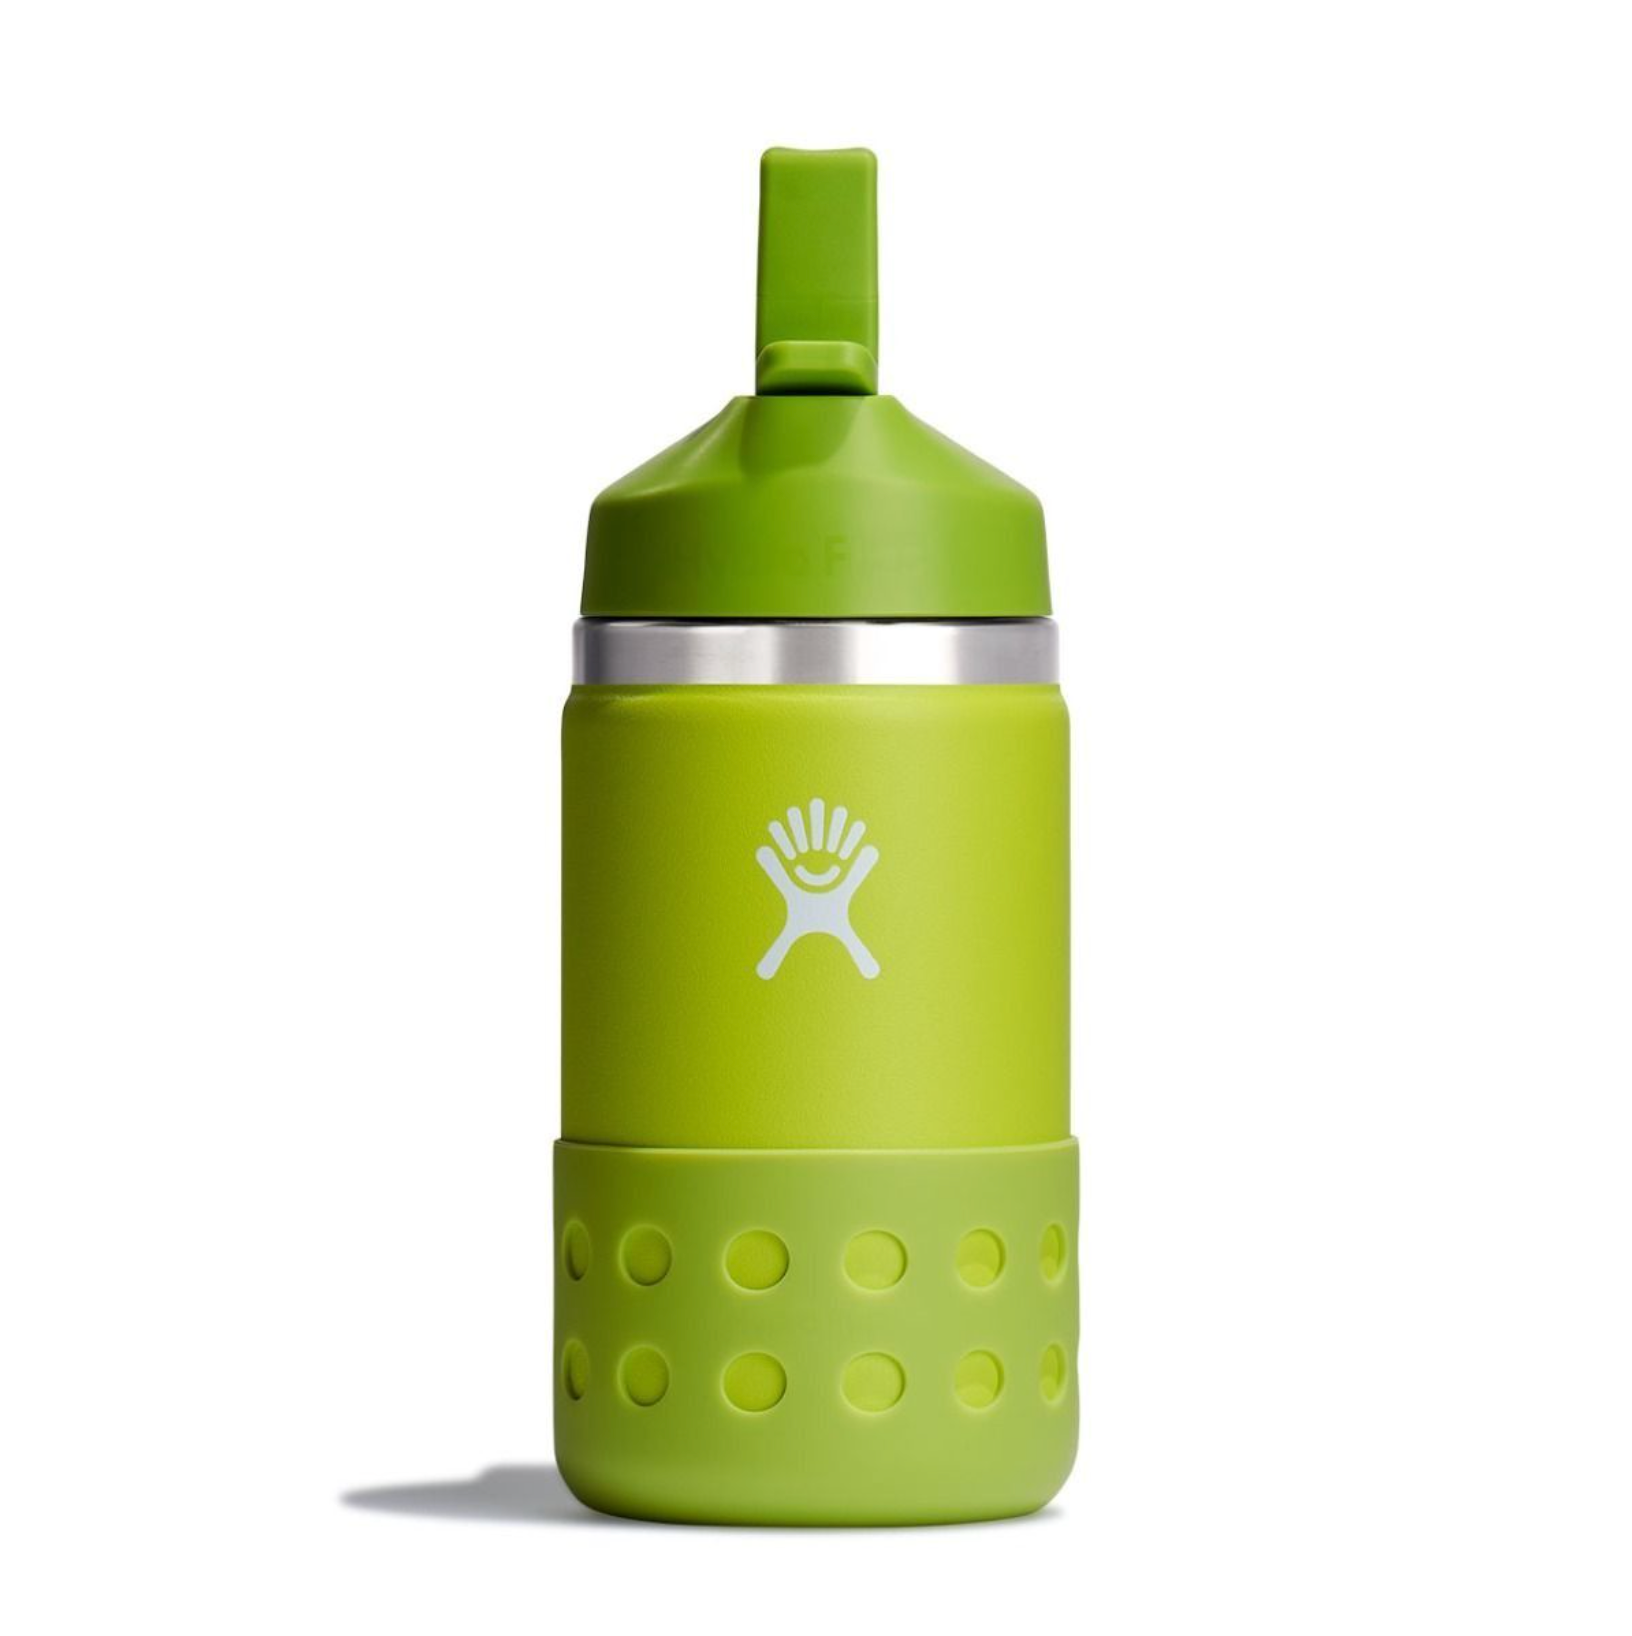 Hydro Flask 20 oz Kids Wide Mouth Straw Lid & Boot